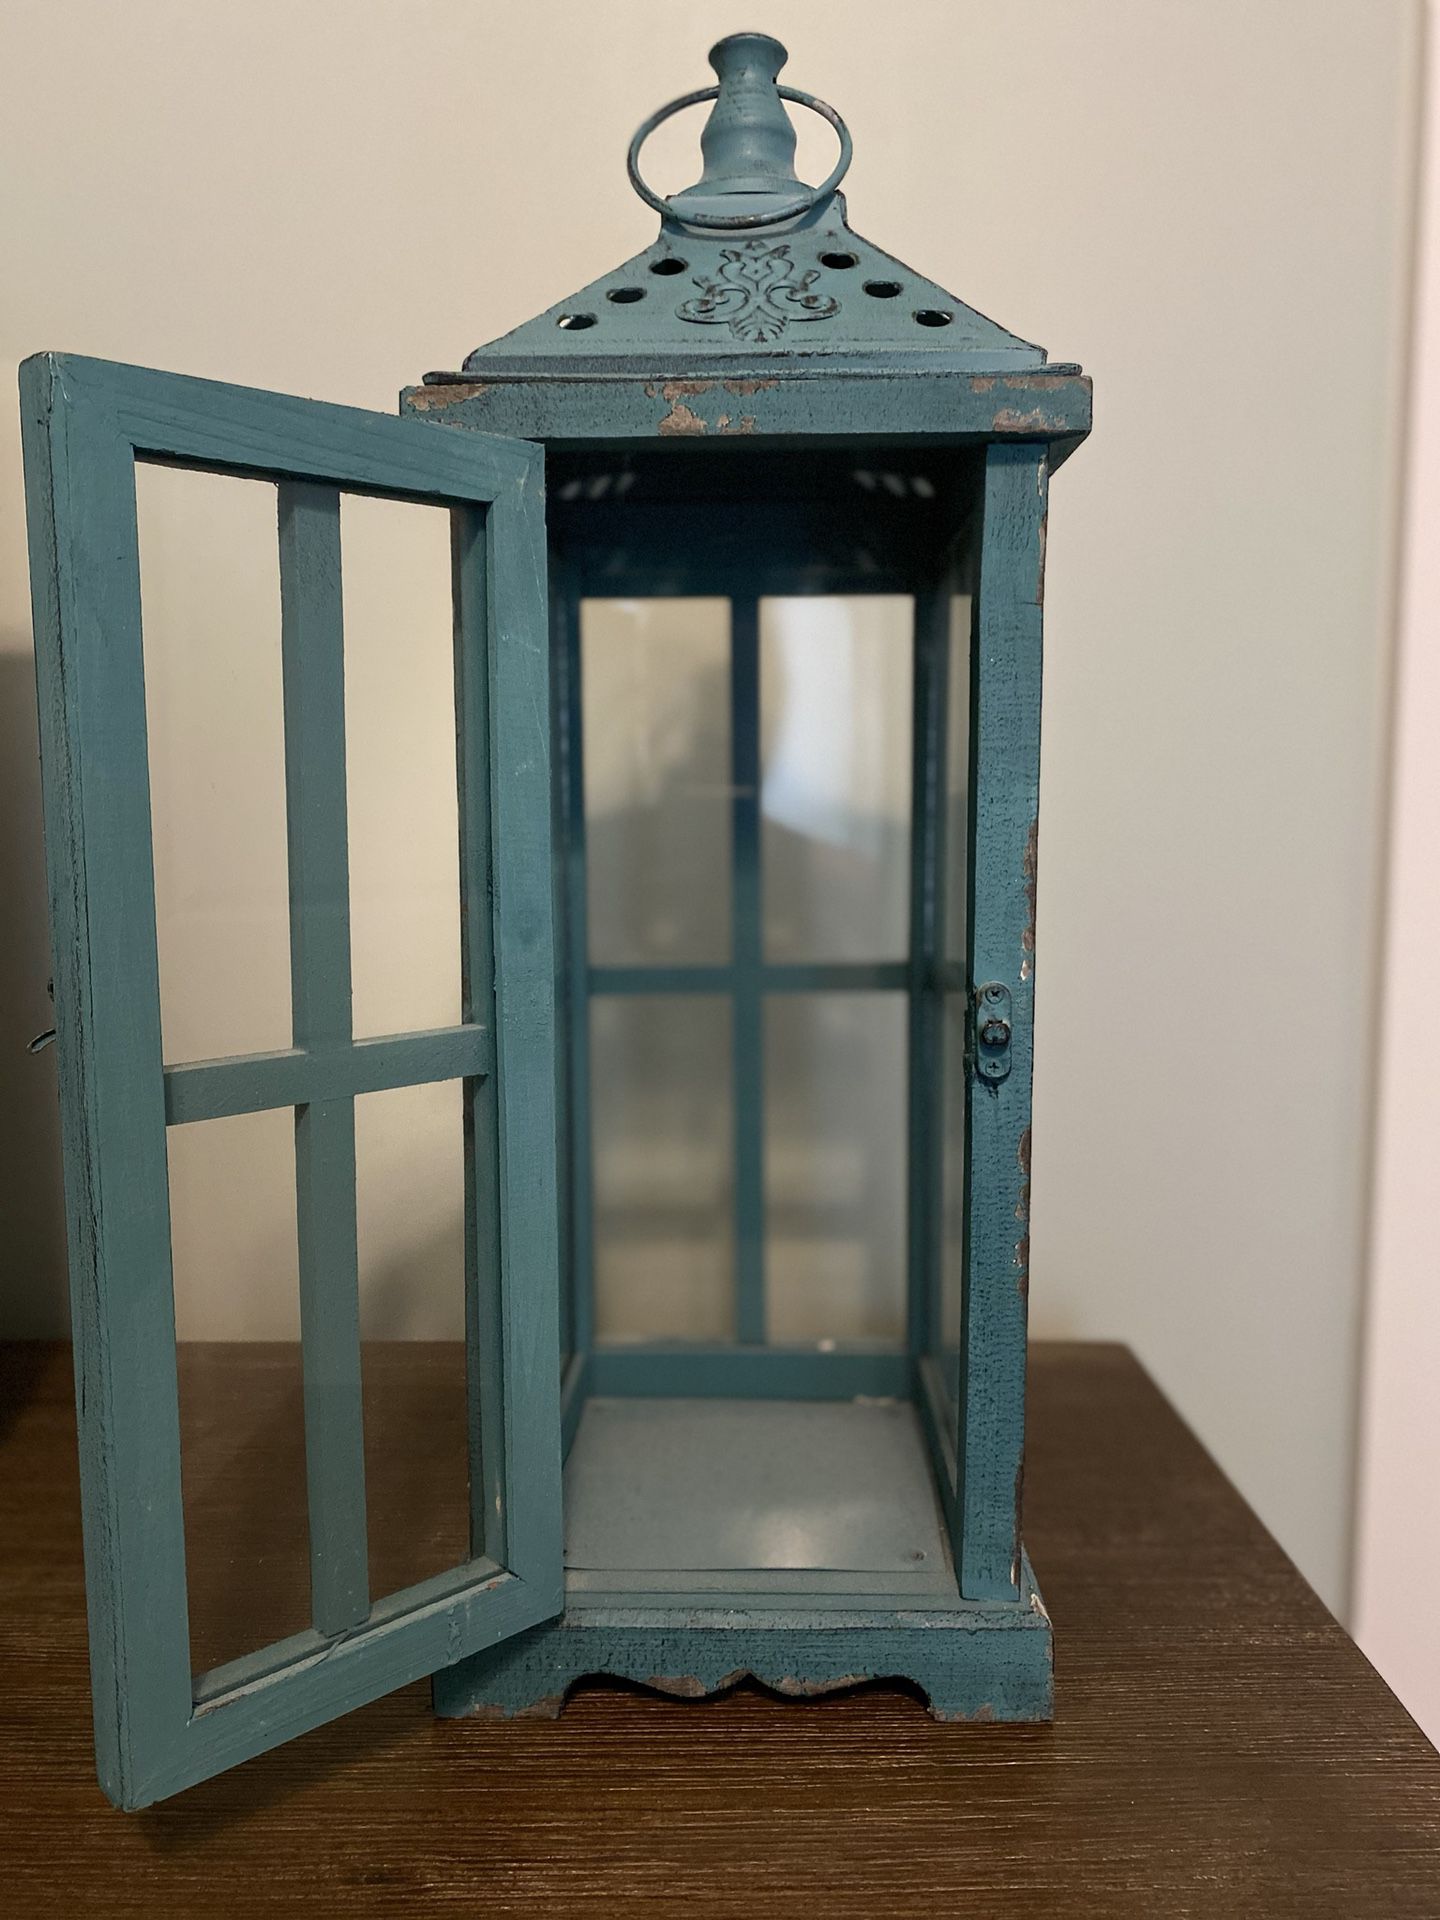 Teal wood and Glass Shabby Chic Lantern